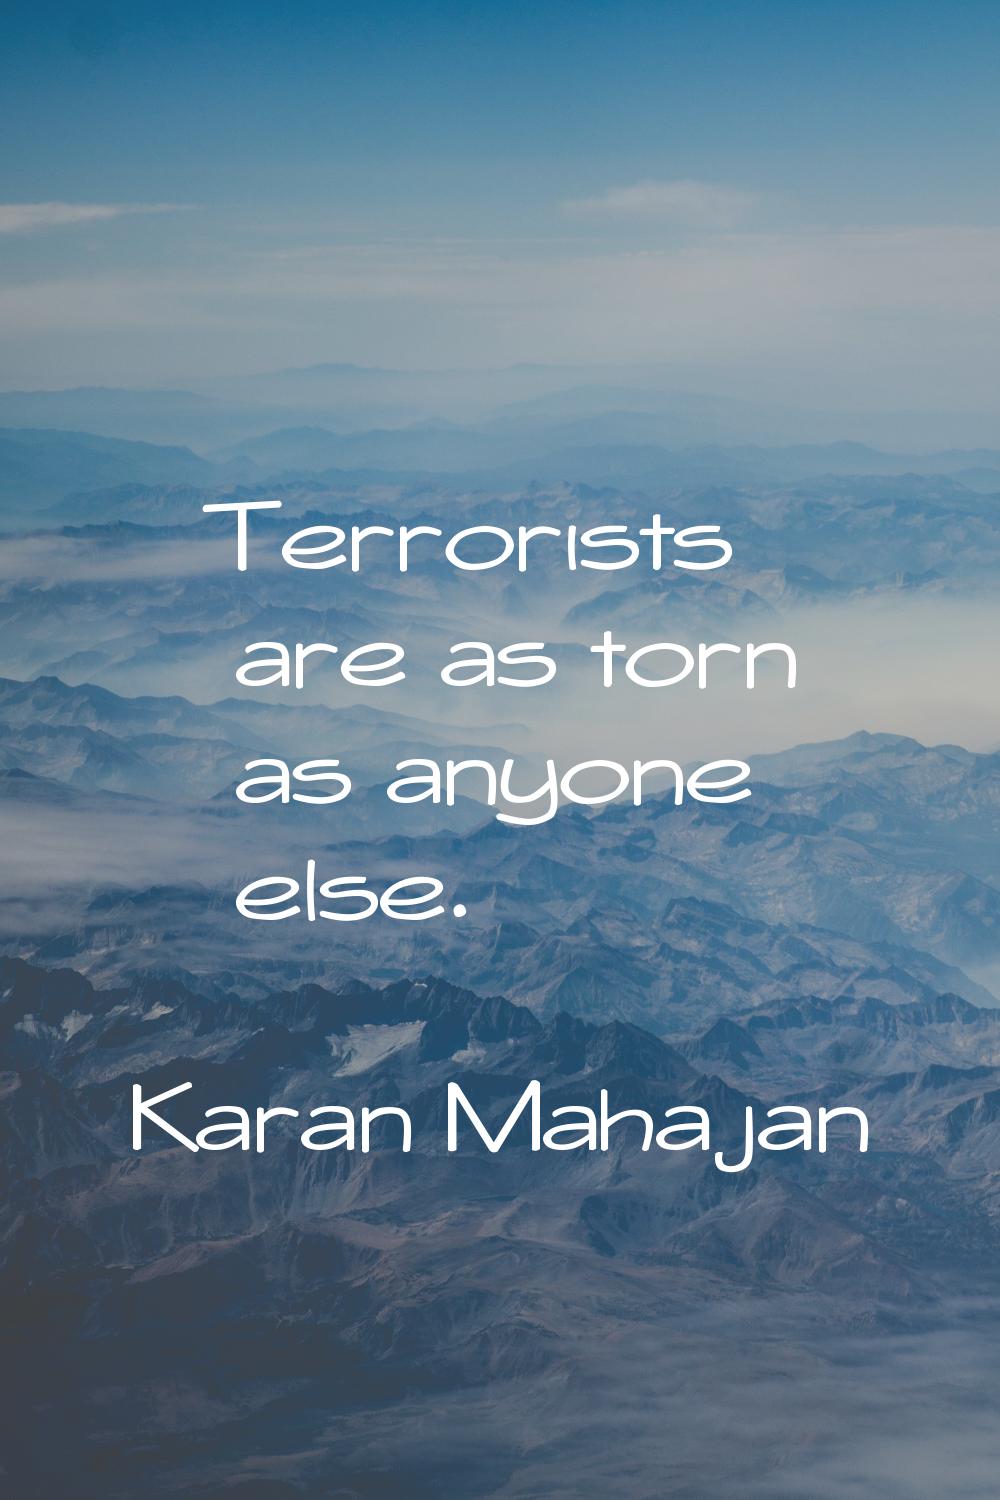 Terrorists are as torn as anyone else.